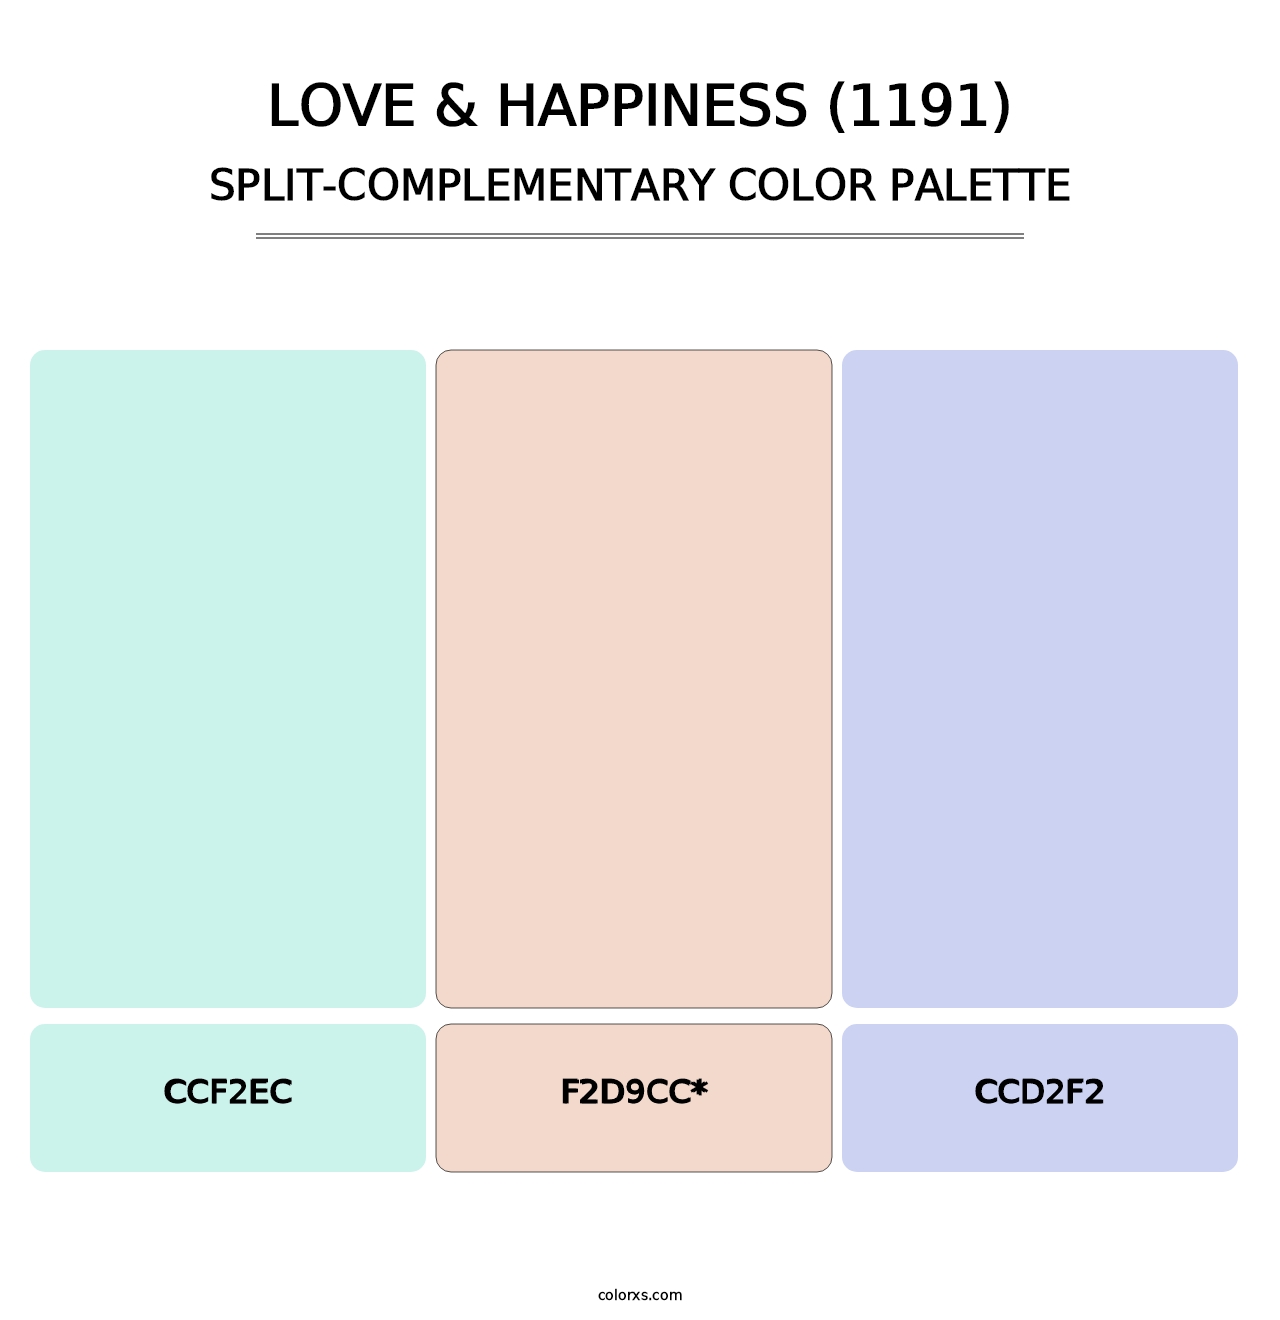 Love & Happiness (1191) - Split-Complementary Color Palette